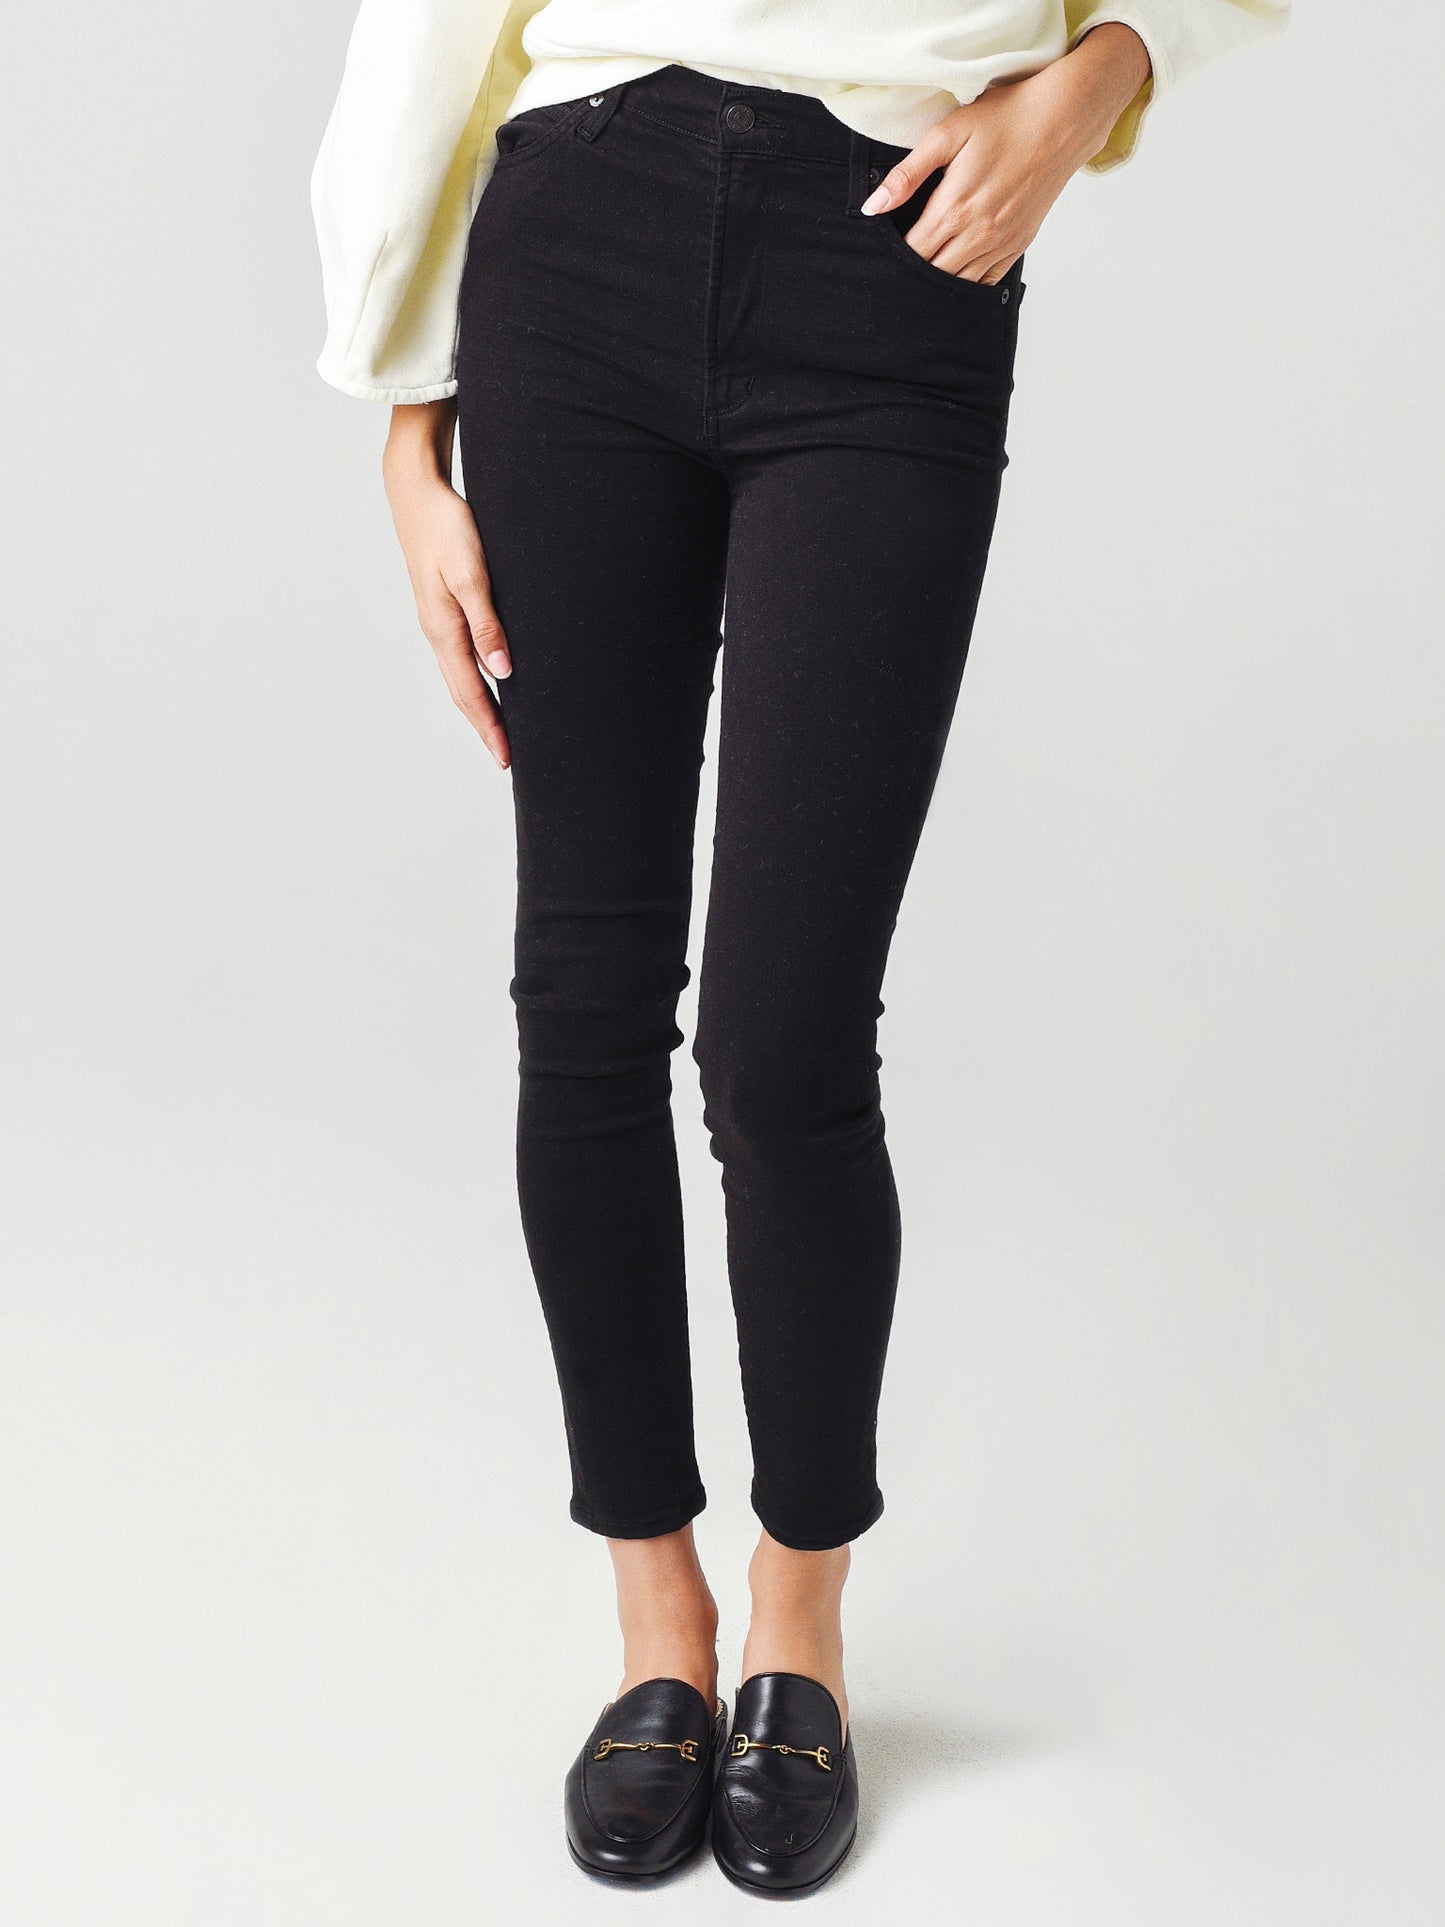 Citizens Of Humanity Women's Chrissy High-Rise Plush Skinny Jean